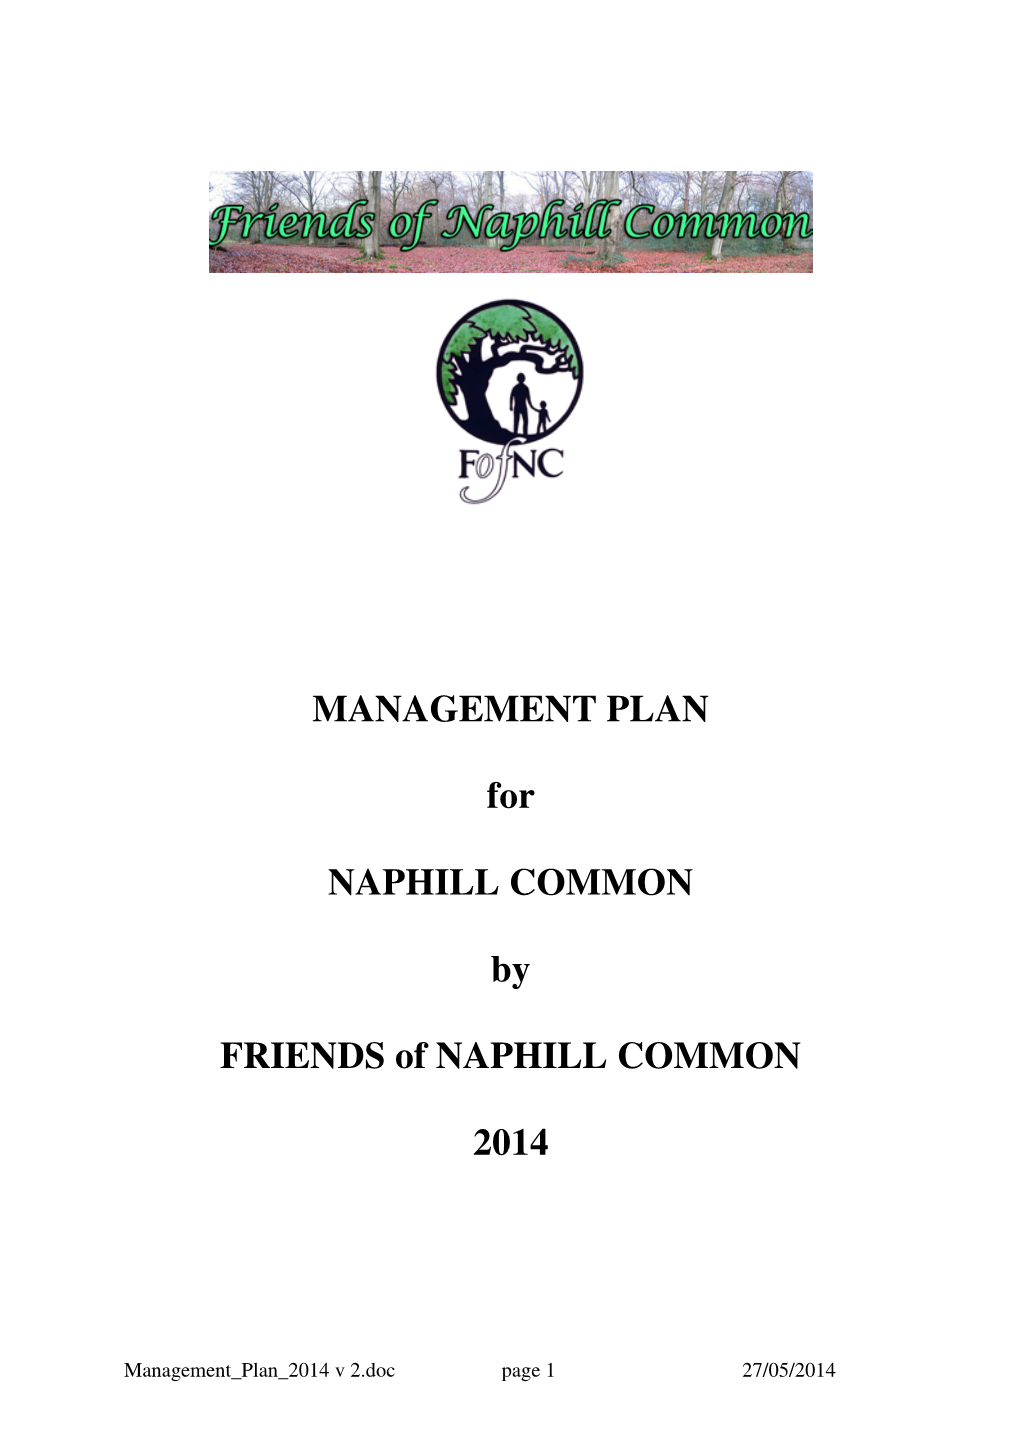 Management Plan for Naphill Common 2014